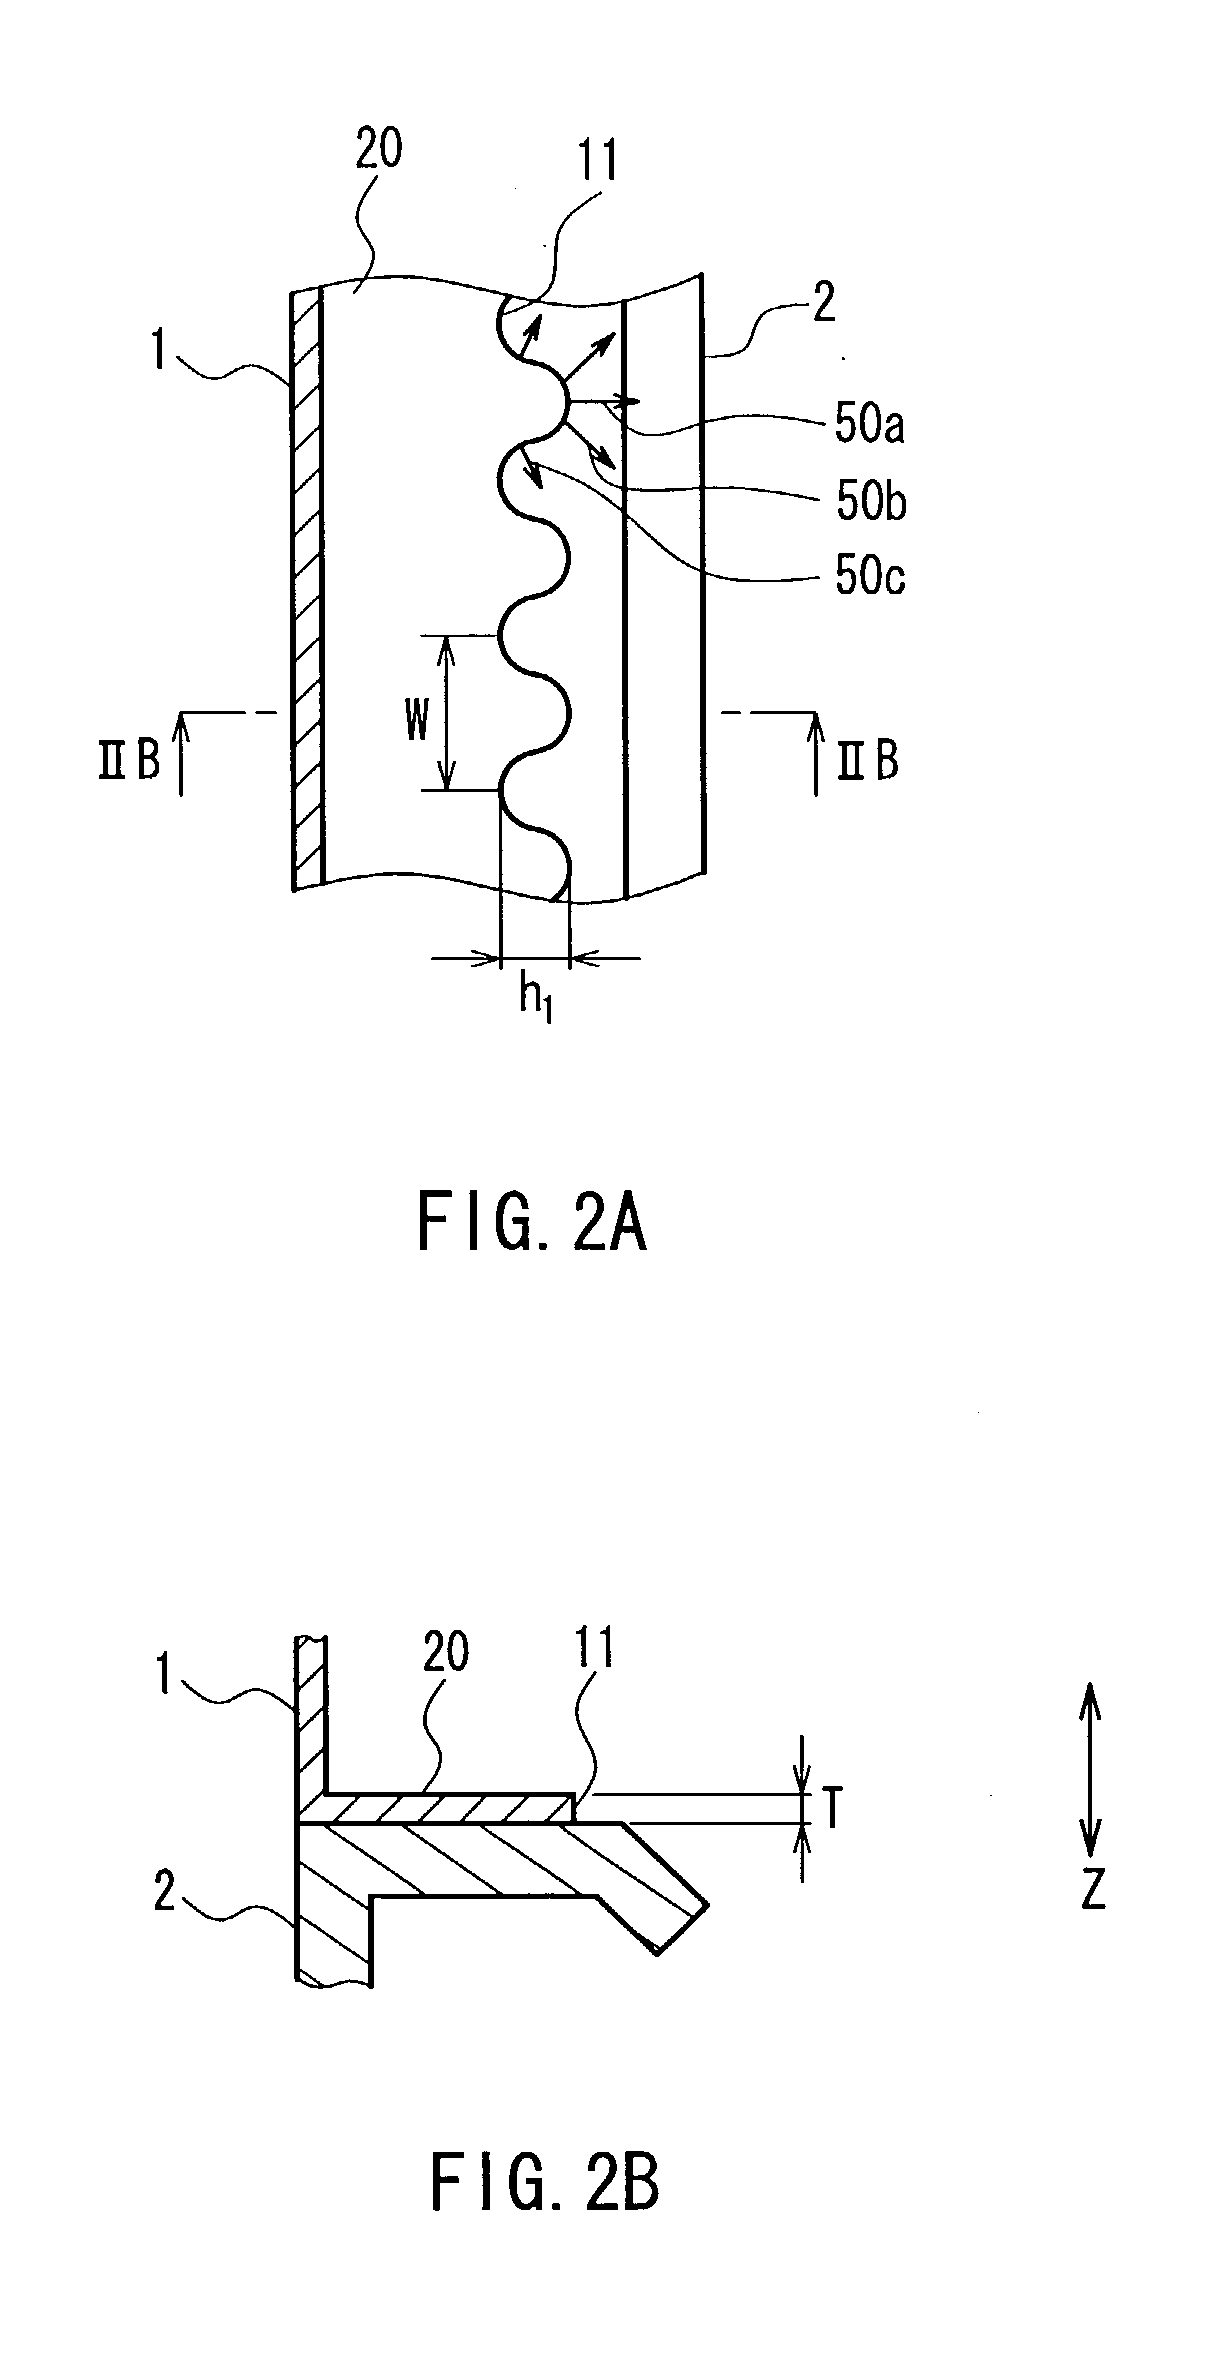 Image receiving tube device